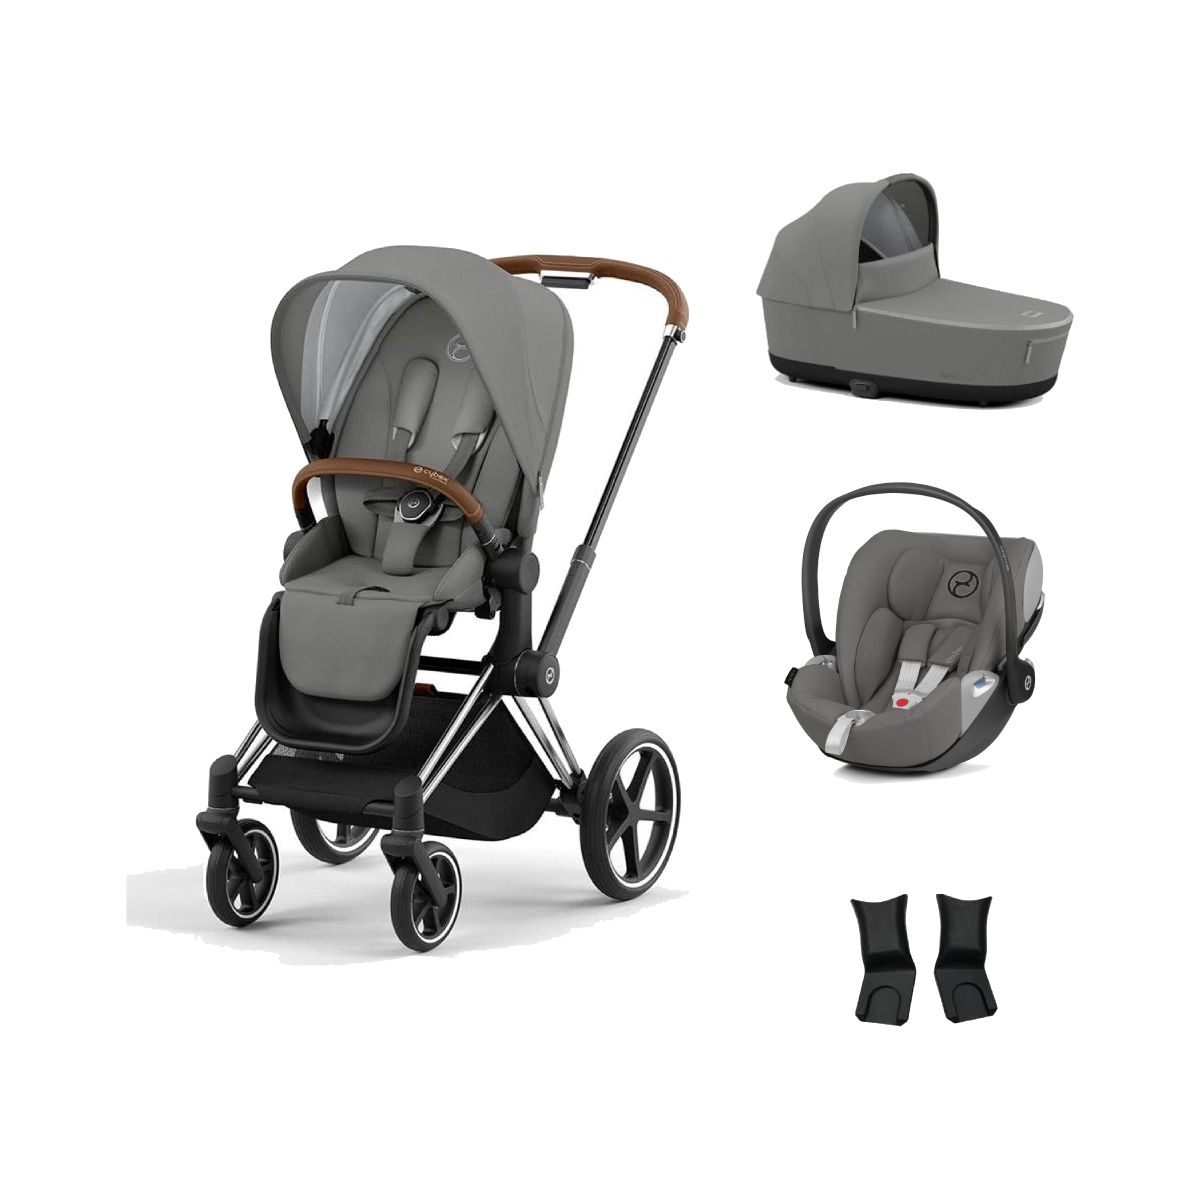 Cybex Priam Chrome Pushchair with Lux Carry Cot & Cloud Z Car Seat